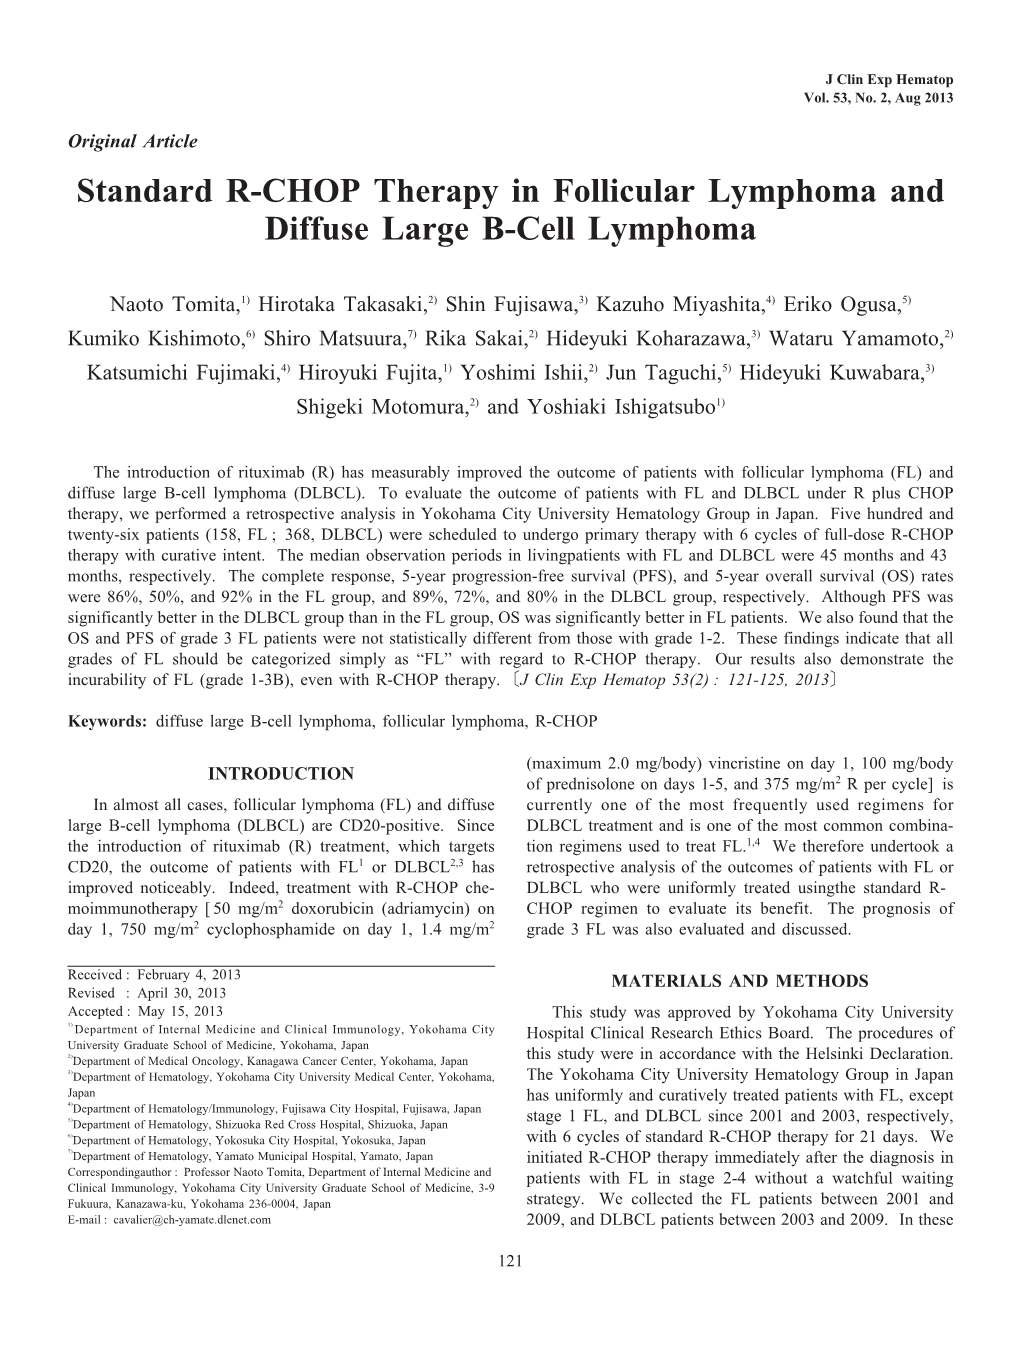 Standard R-CHOP Therapy in Follicular Lymphoma and Diffuse Large B-Cell Lymphoma